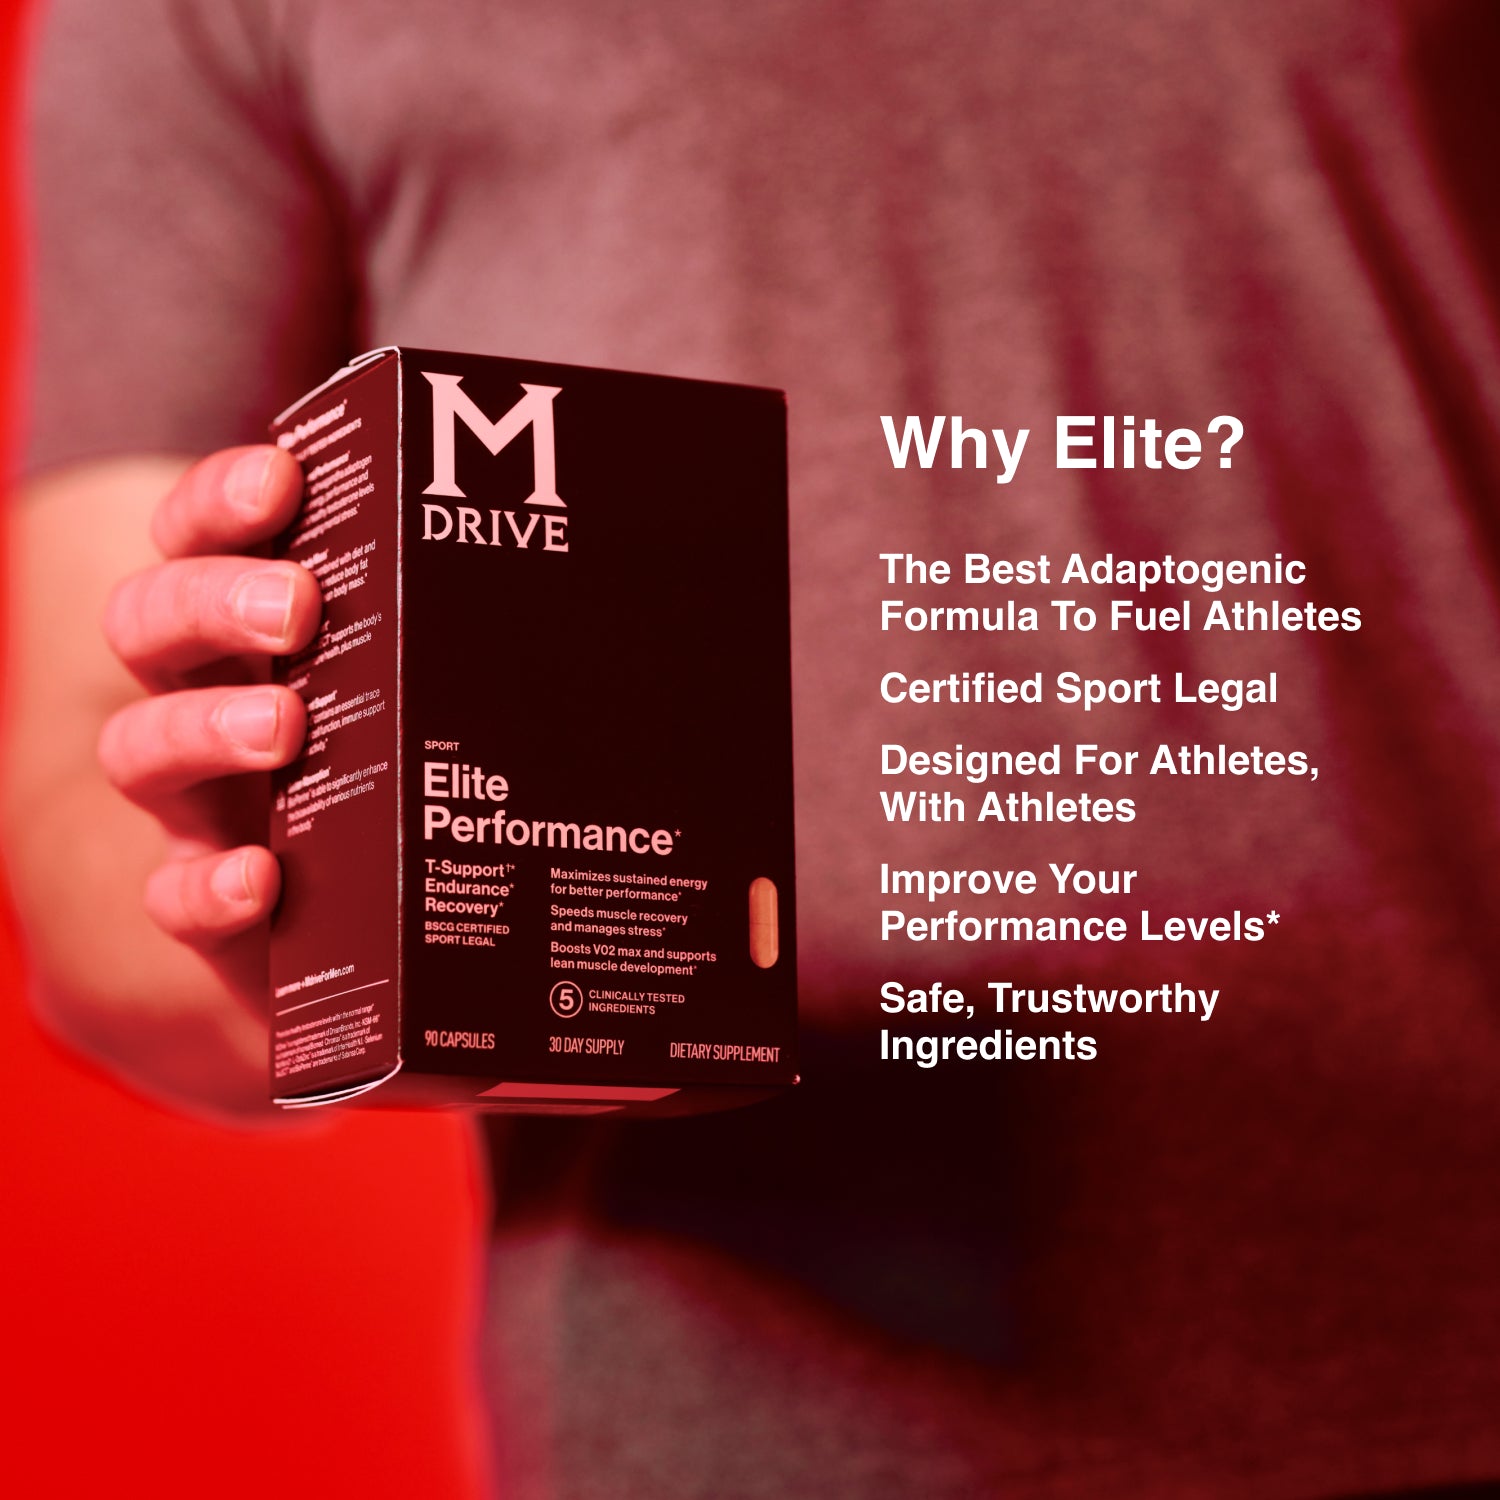 Why Mdrive Elite?